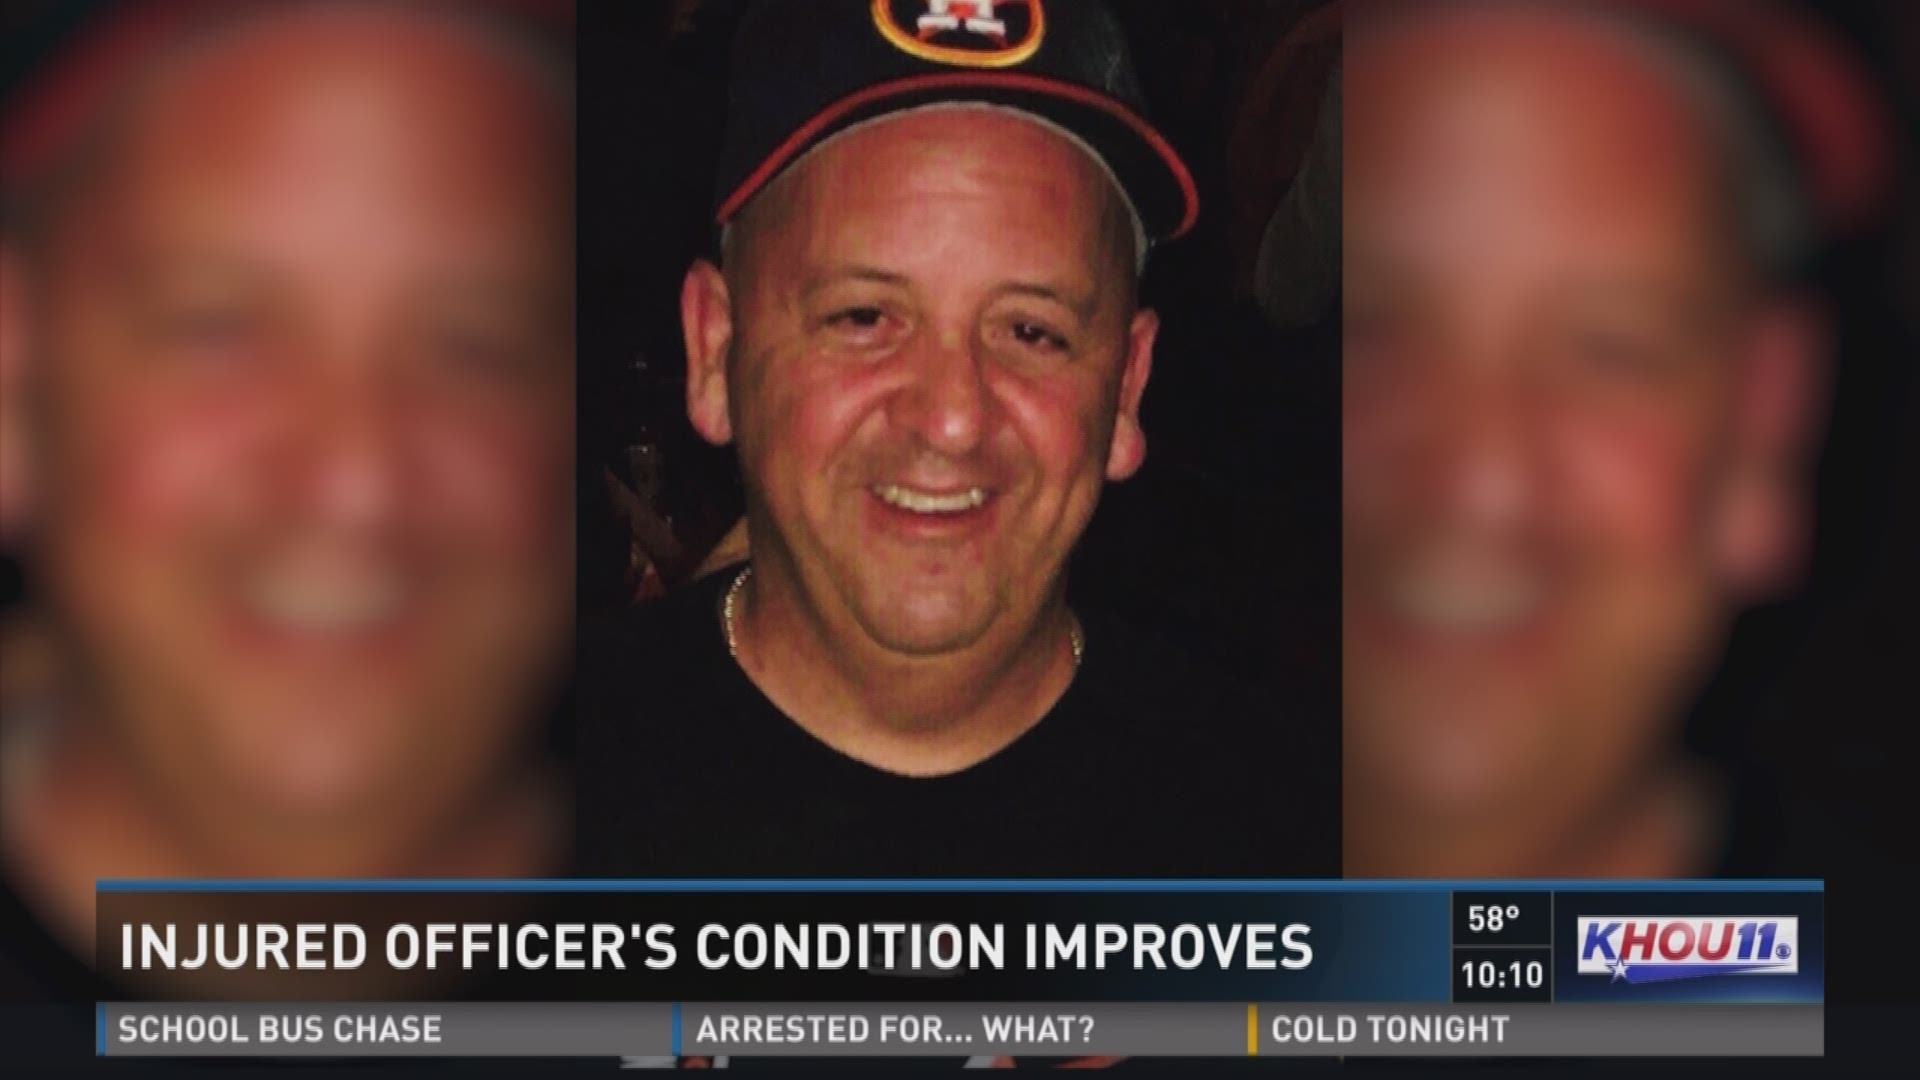 Jerry Flores, an officer who was critically injured in a golf accident, is doing better after undergoing a third surgery, according to Houston Police Chief Art Acevedo. 